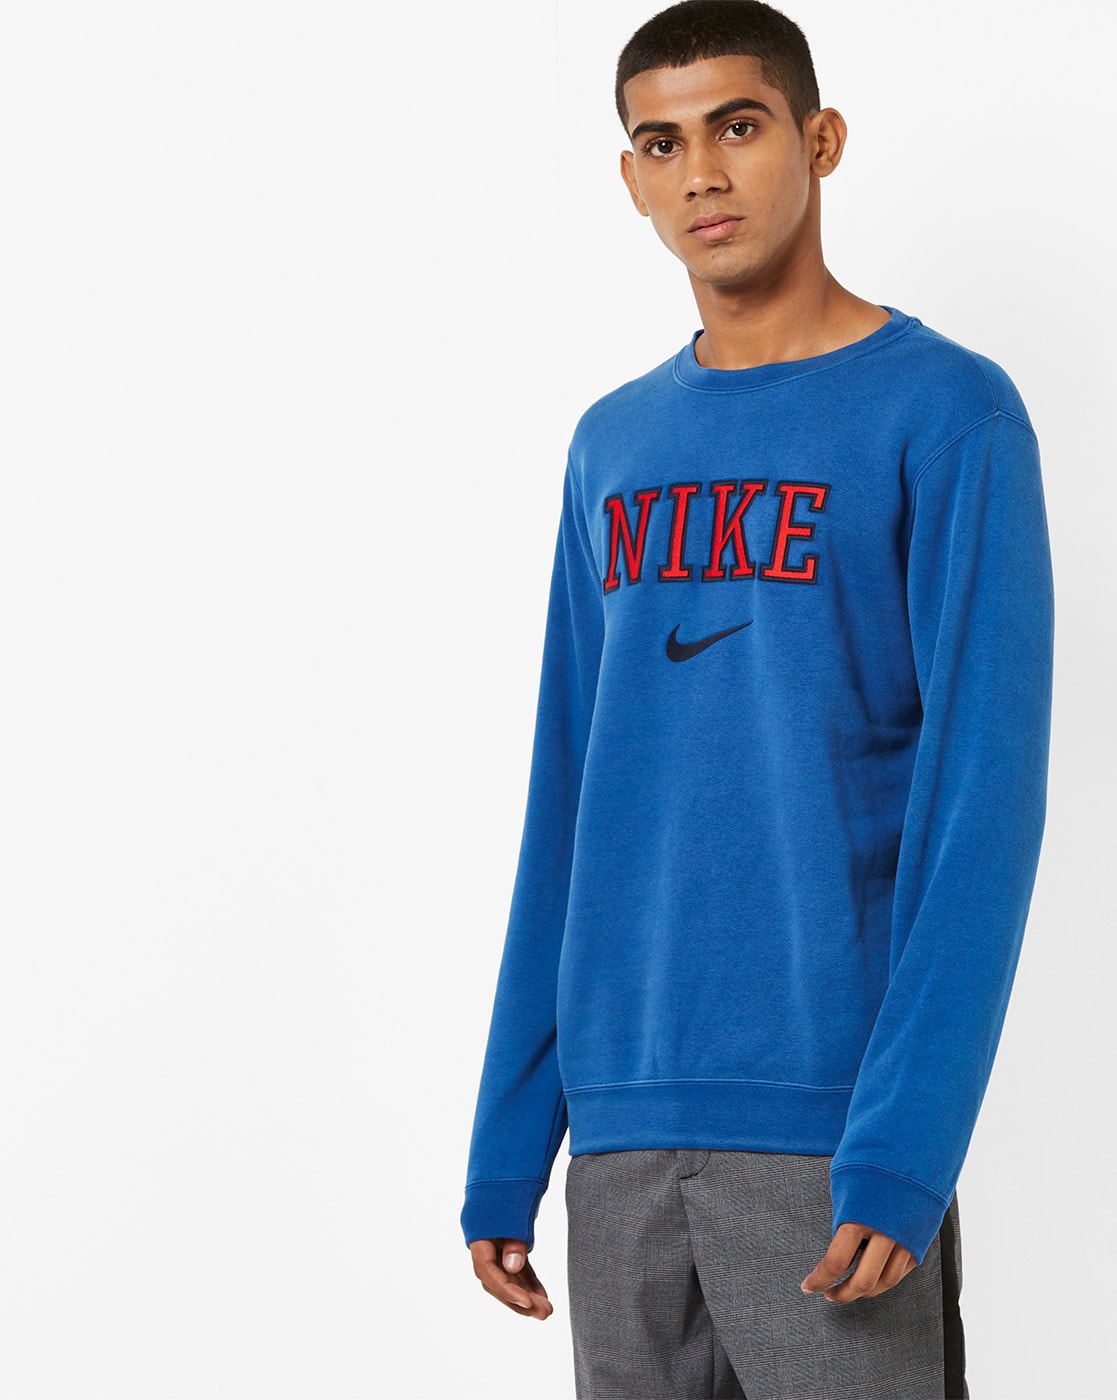 Buy Blue Tshirts for Men by NIKE Online 